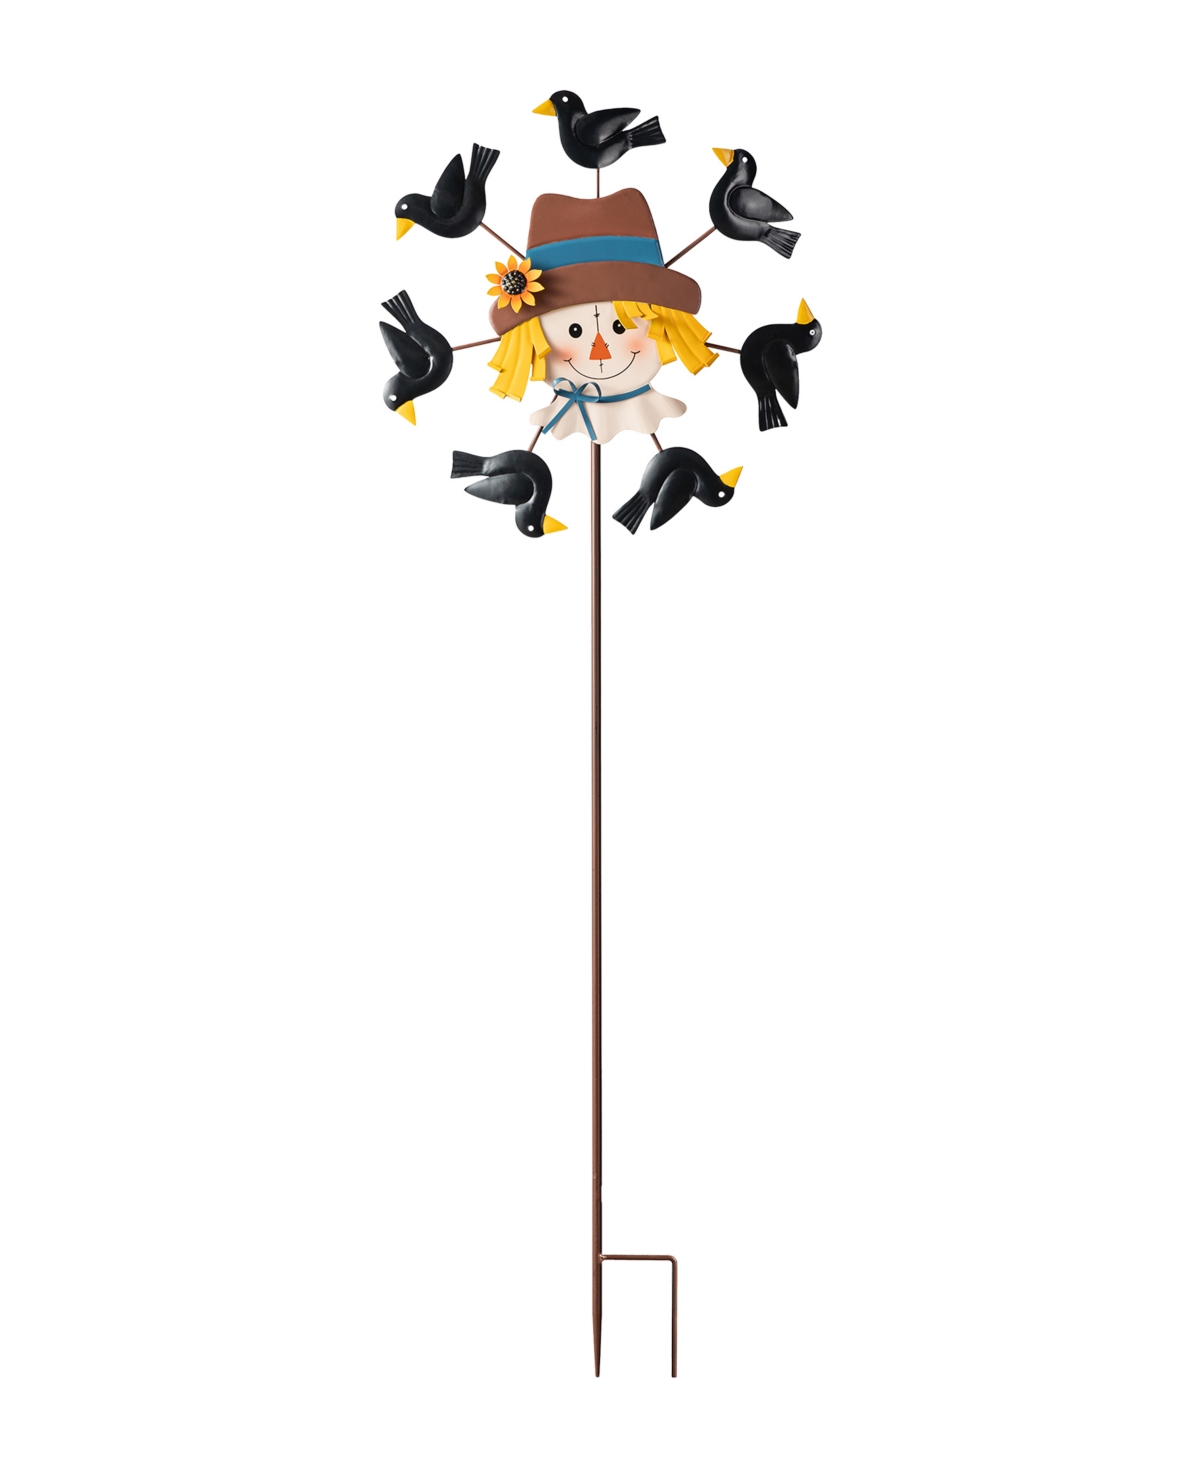 41.75"H Fall Metal Scarecrow Head with Crows Windmill Yard Stake or Hanging Decor - Multi